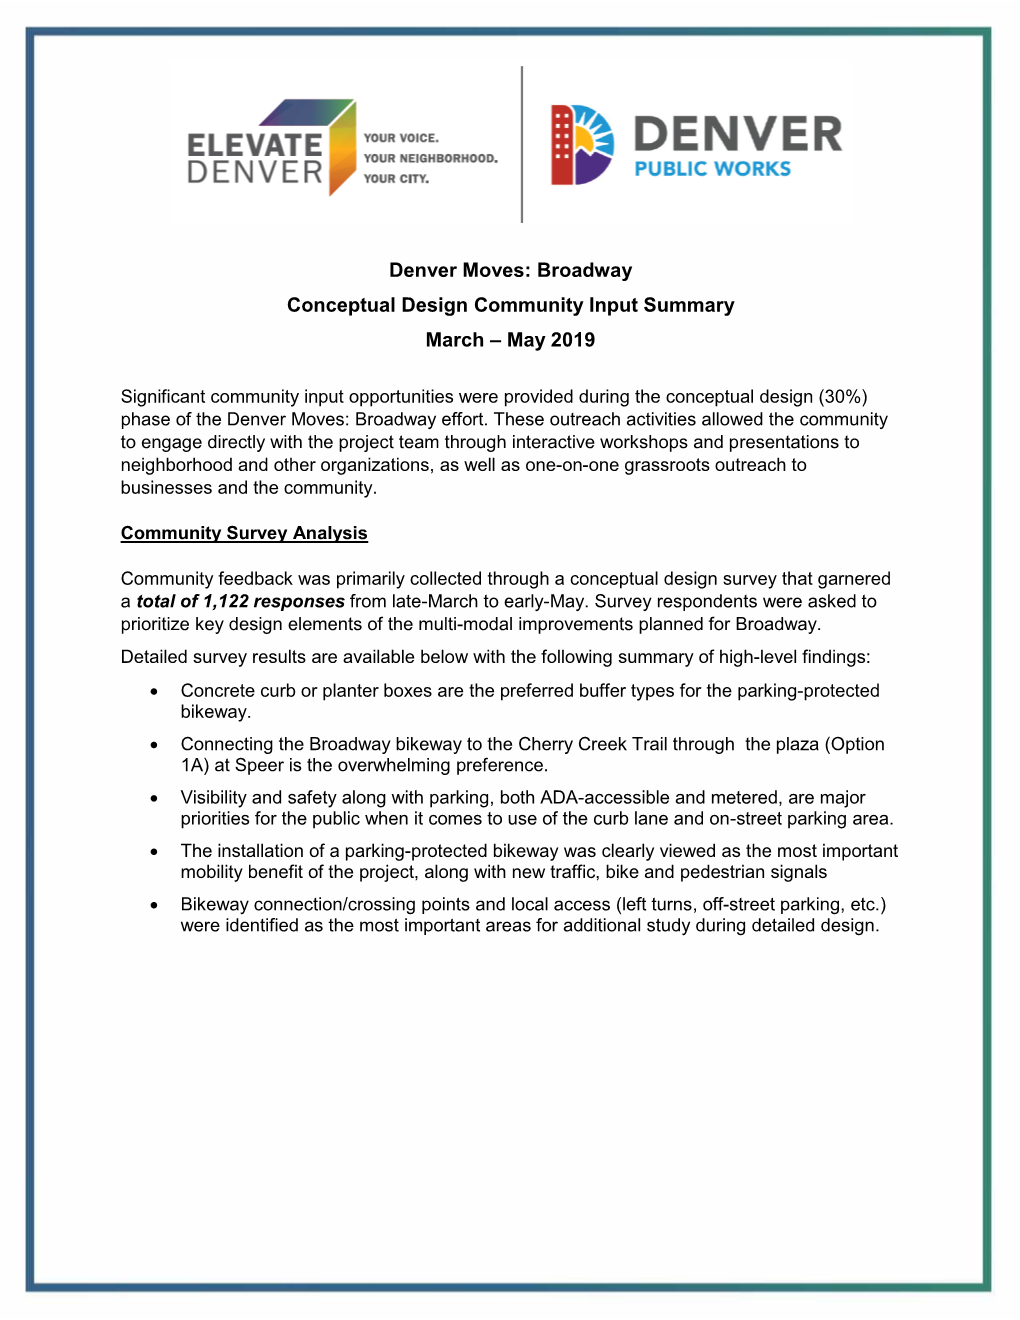 Denver Moves: Broadway Conceptual Design Community Input Summary March – May 2019